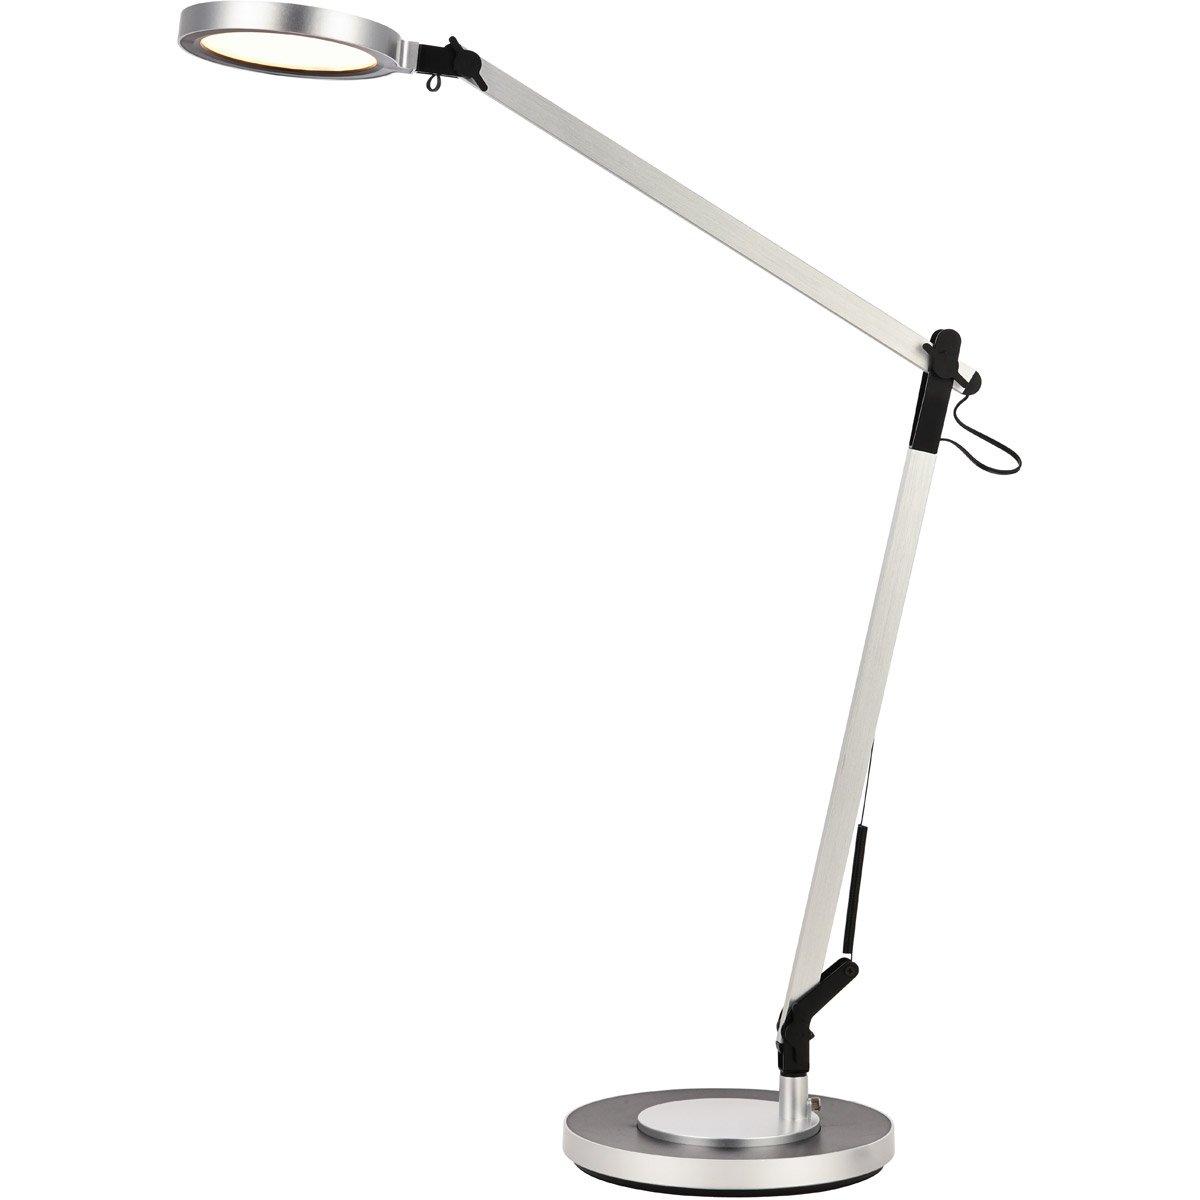 Ledds008 Sleek Led Desk Lamp With Smooth Touch Dimmer & Usb, Silver